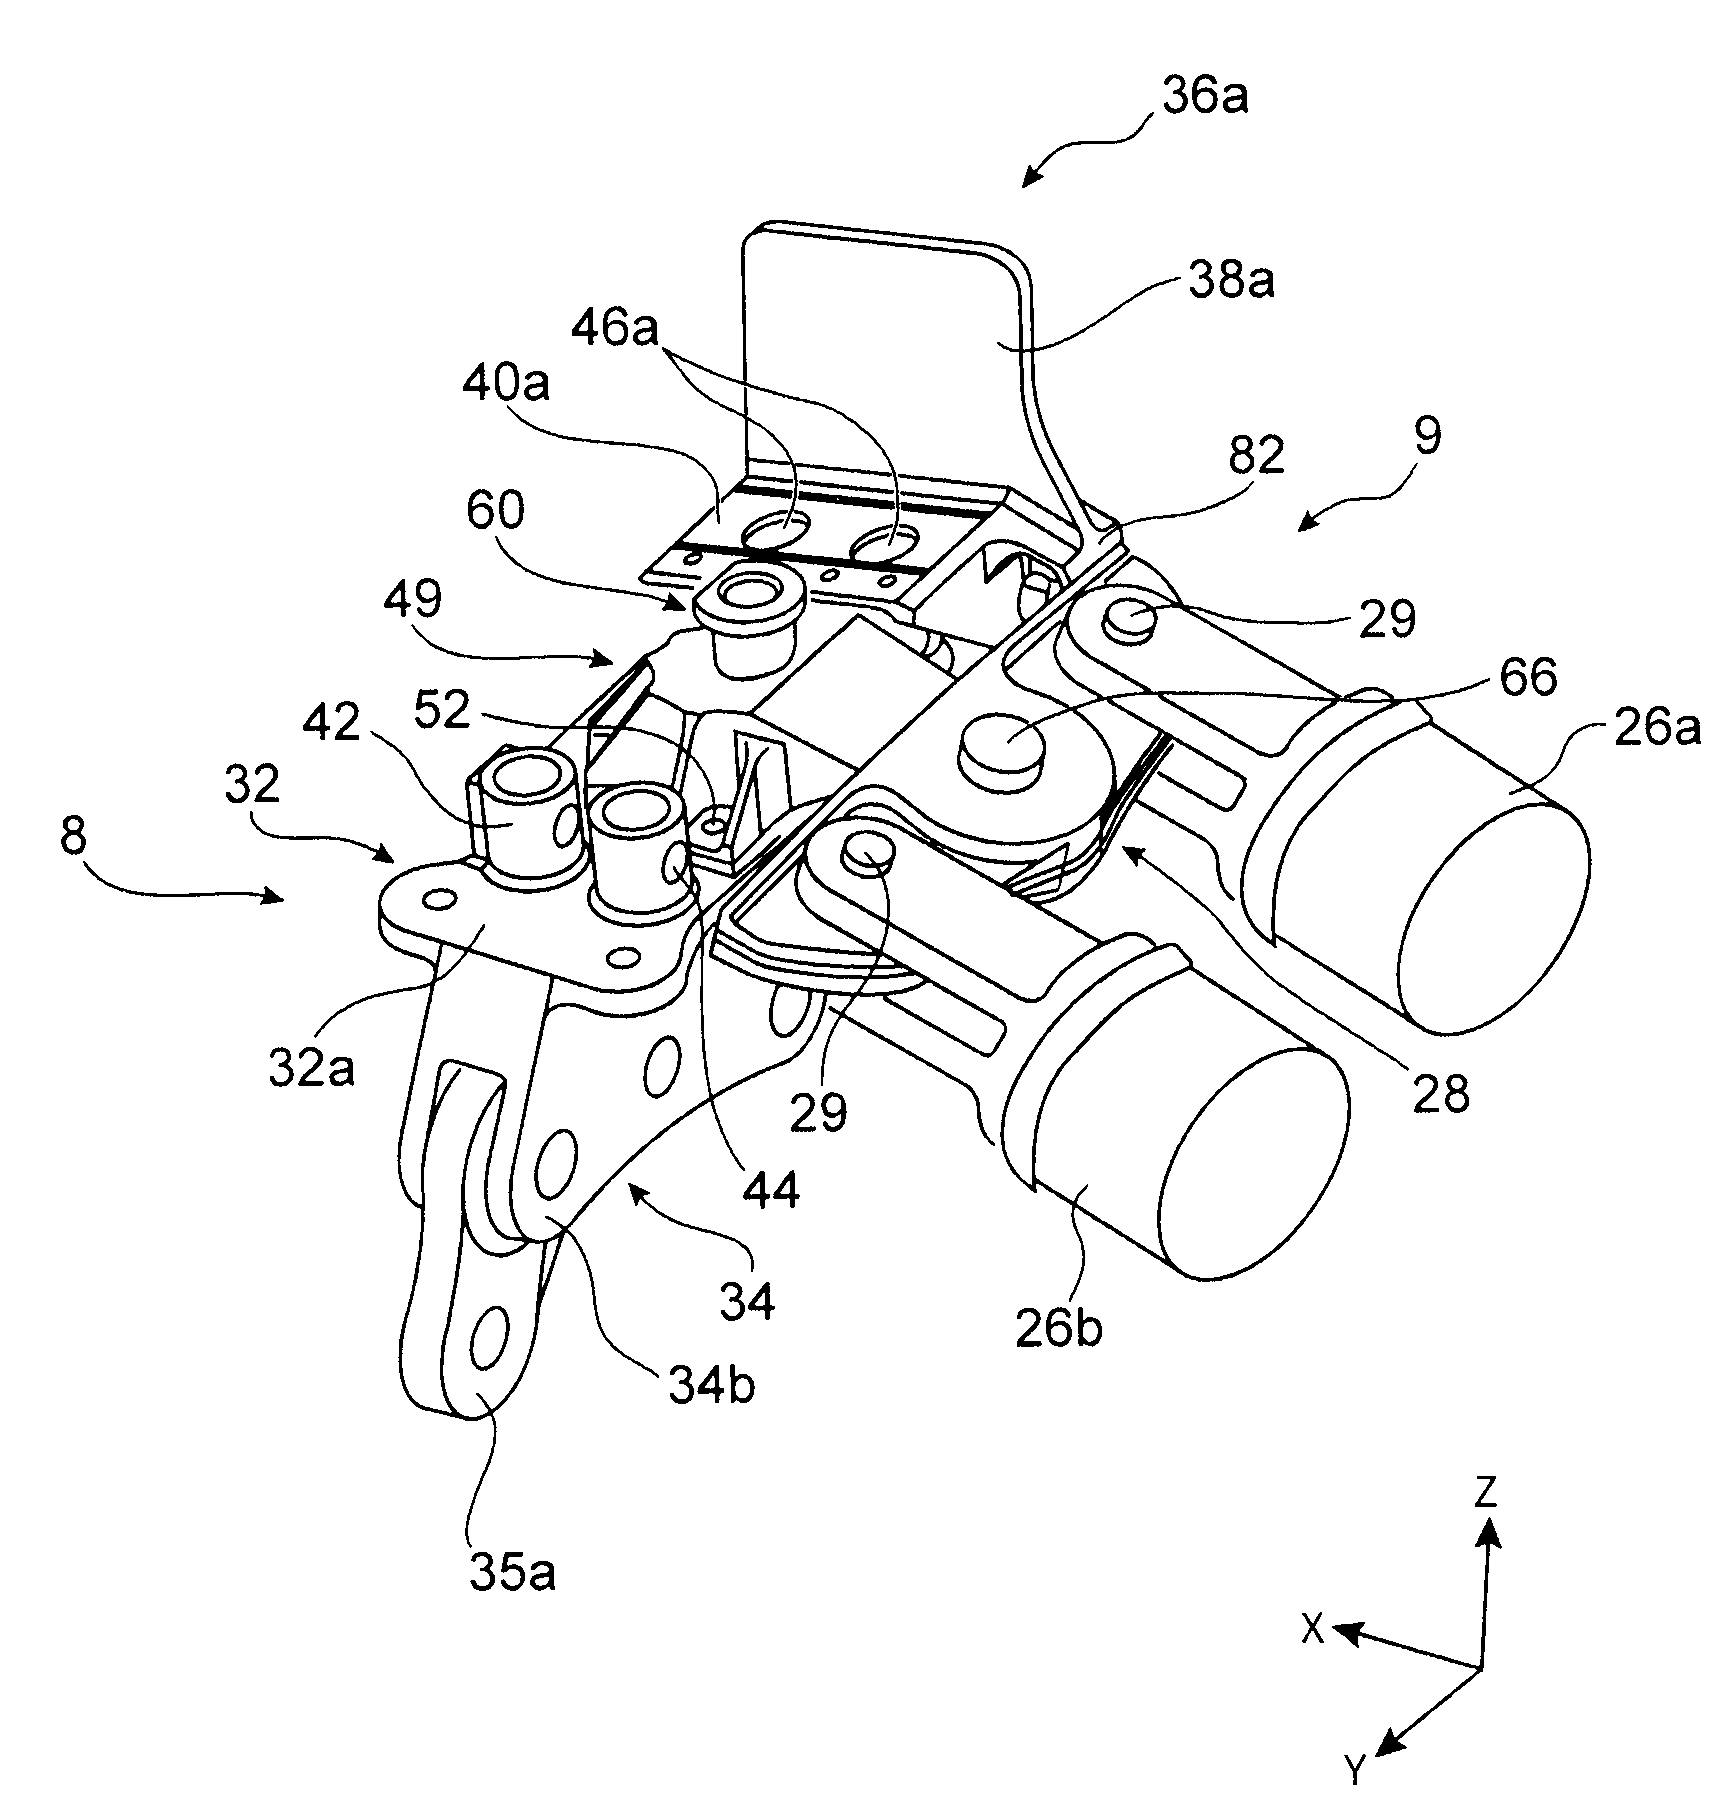 Device for attaching an aircraft engine comprising a thrust force take-up device with a compact design